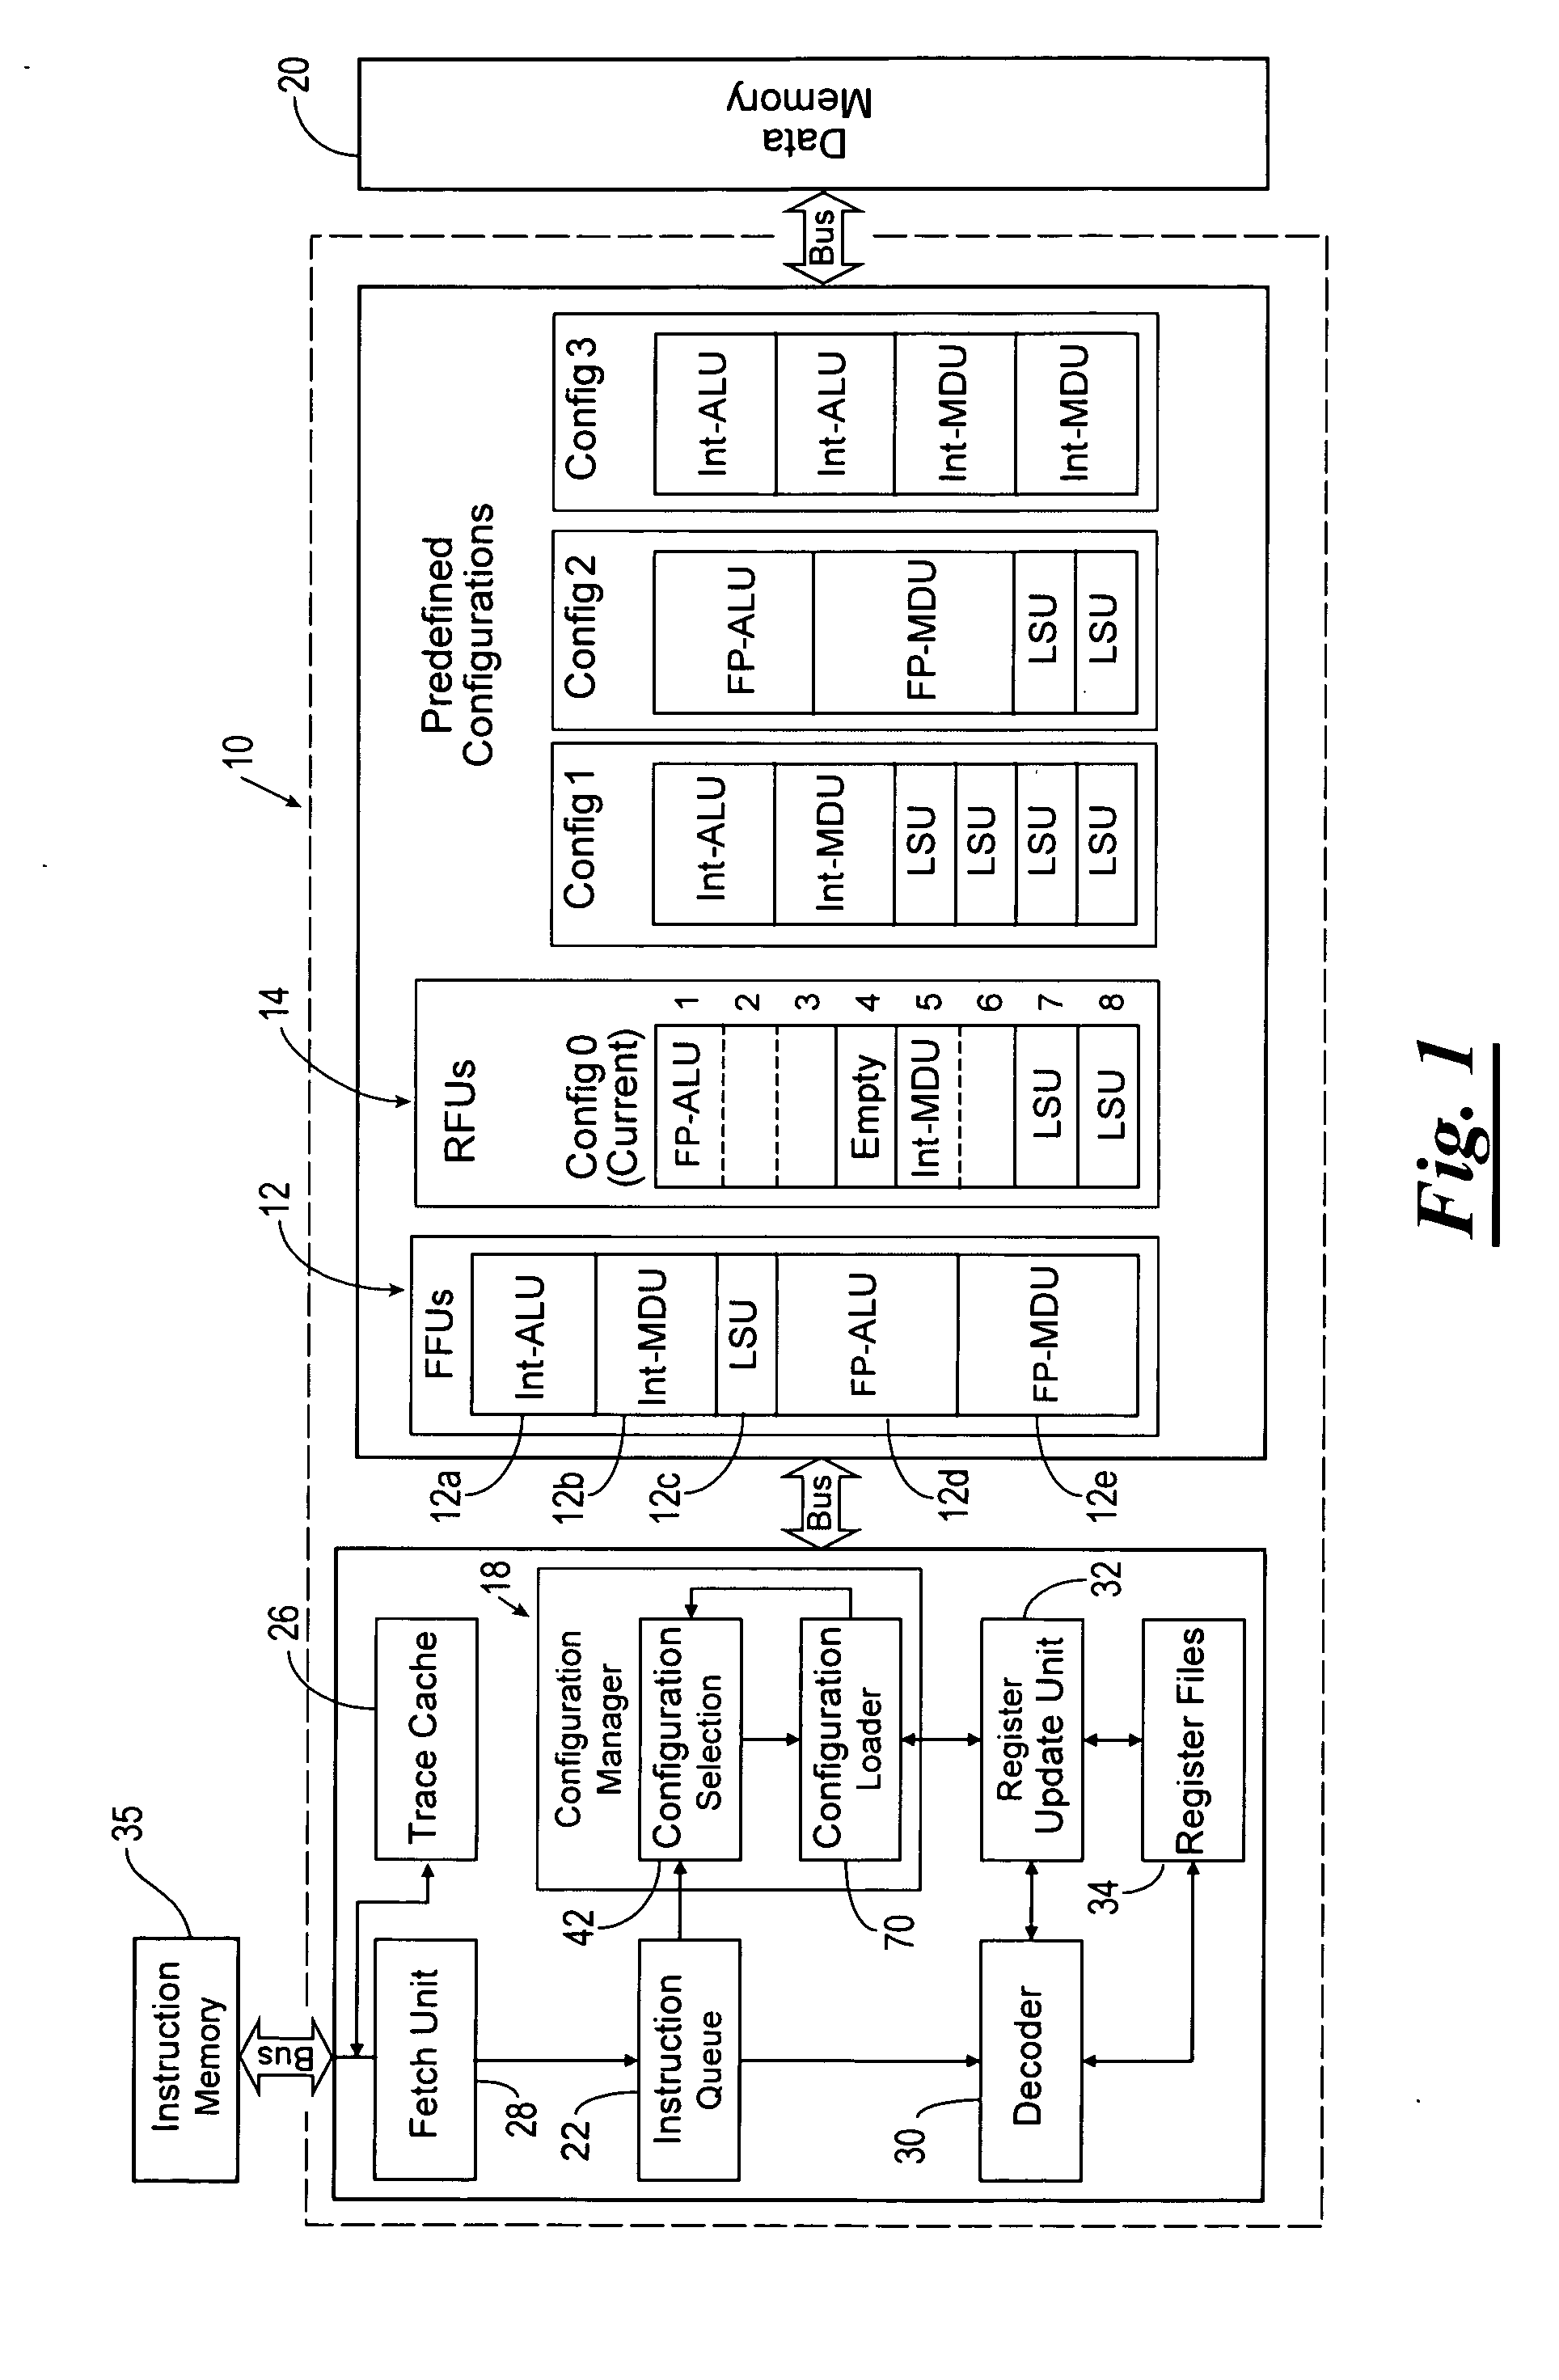 Configuration steering for a reconfigurable superscalar processor